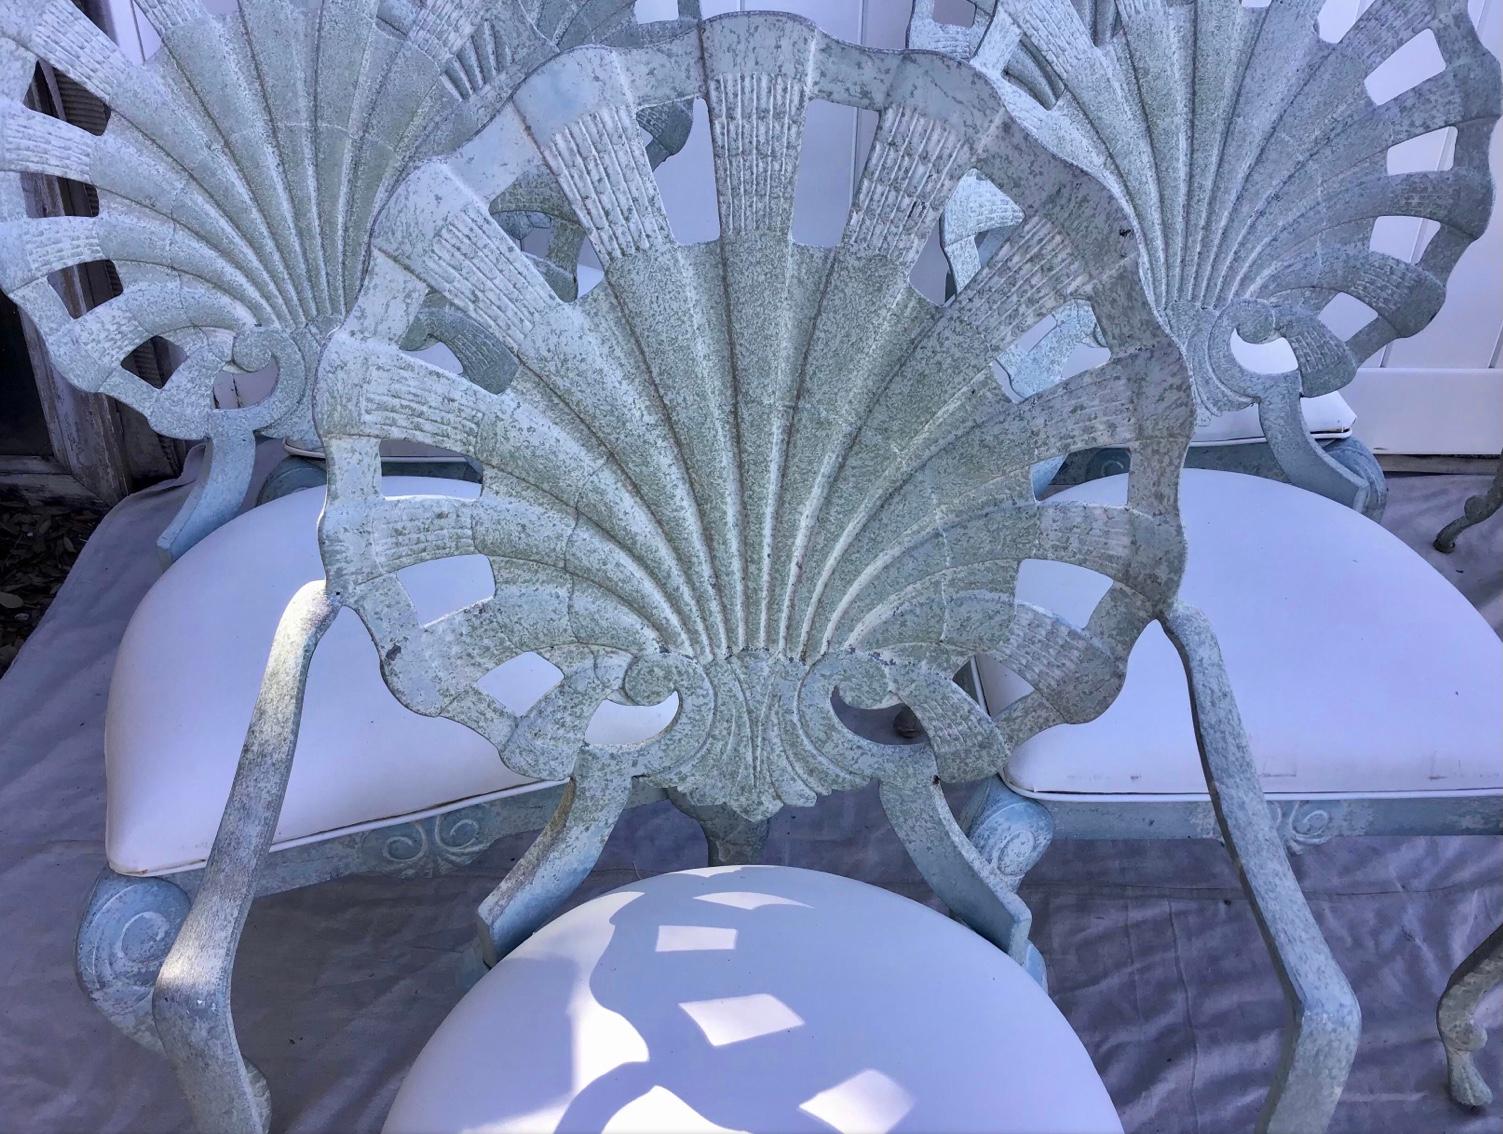 Aluminum Vintage Brown Jorden Grotto Shell Back Palm Beach Regency Patio Chairs Set of 8